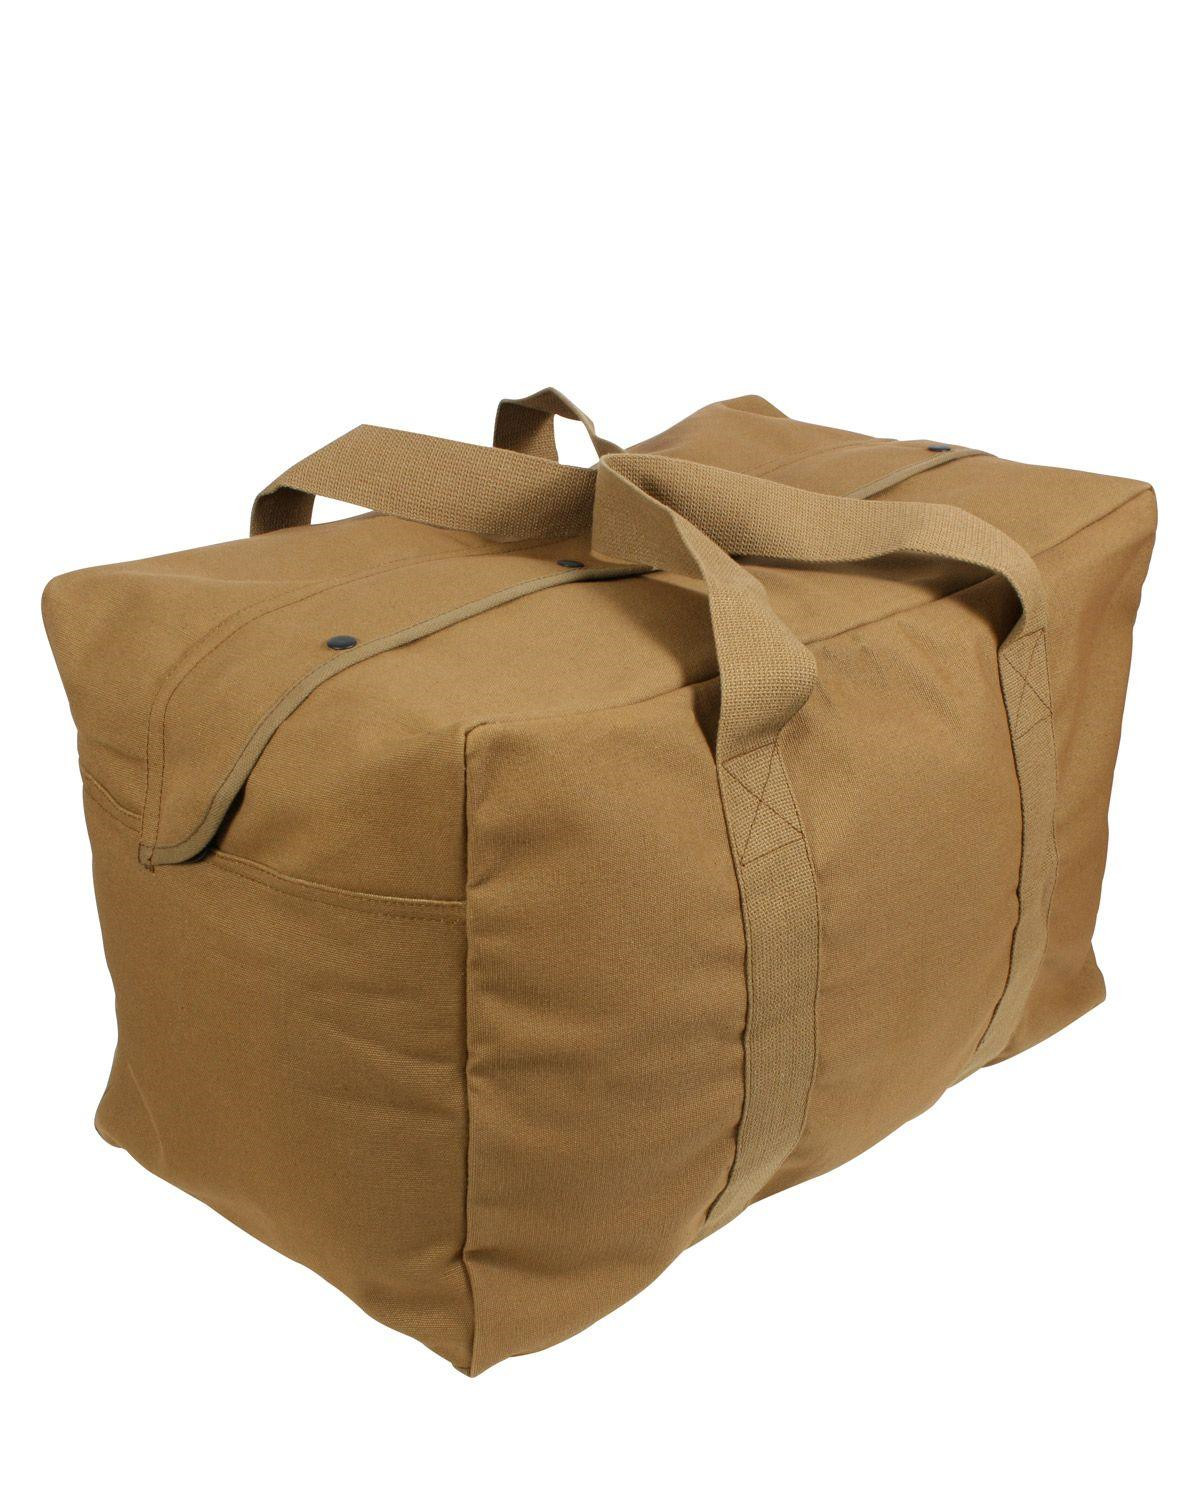 8: Rothco Parachute Cargo Taske - 75 liter (Coyote Brun, One Size)